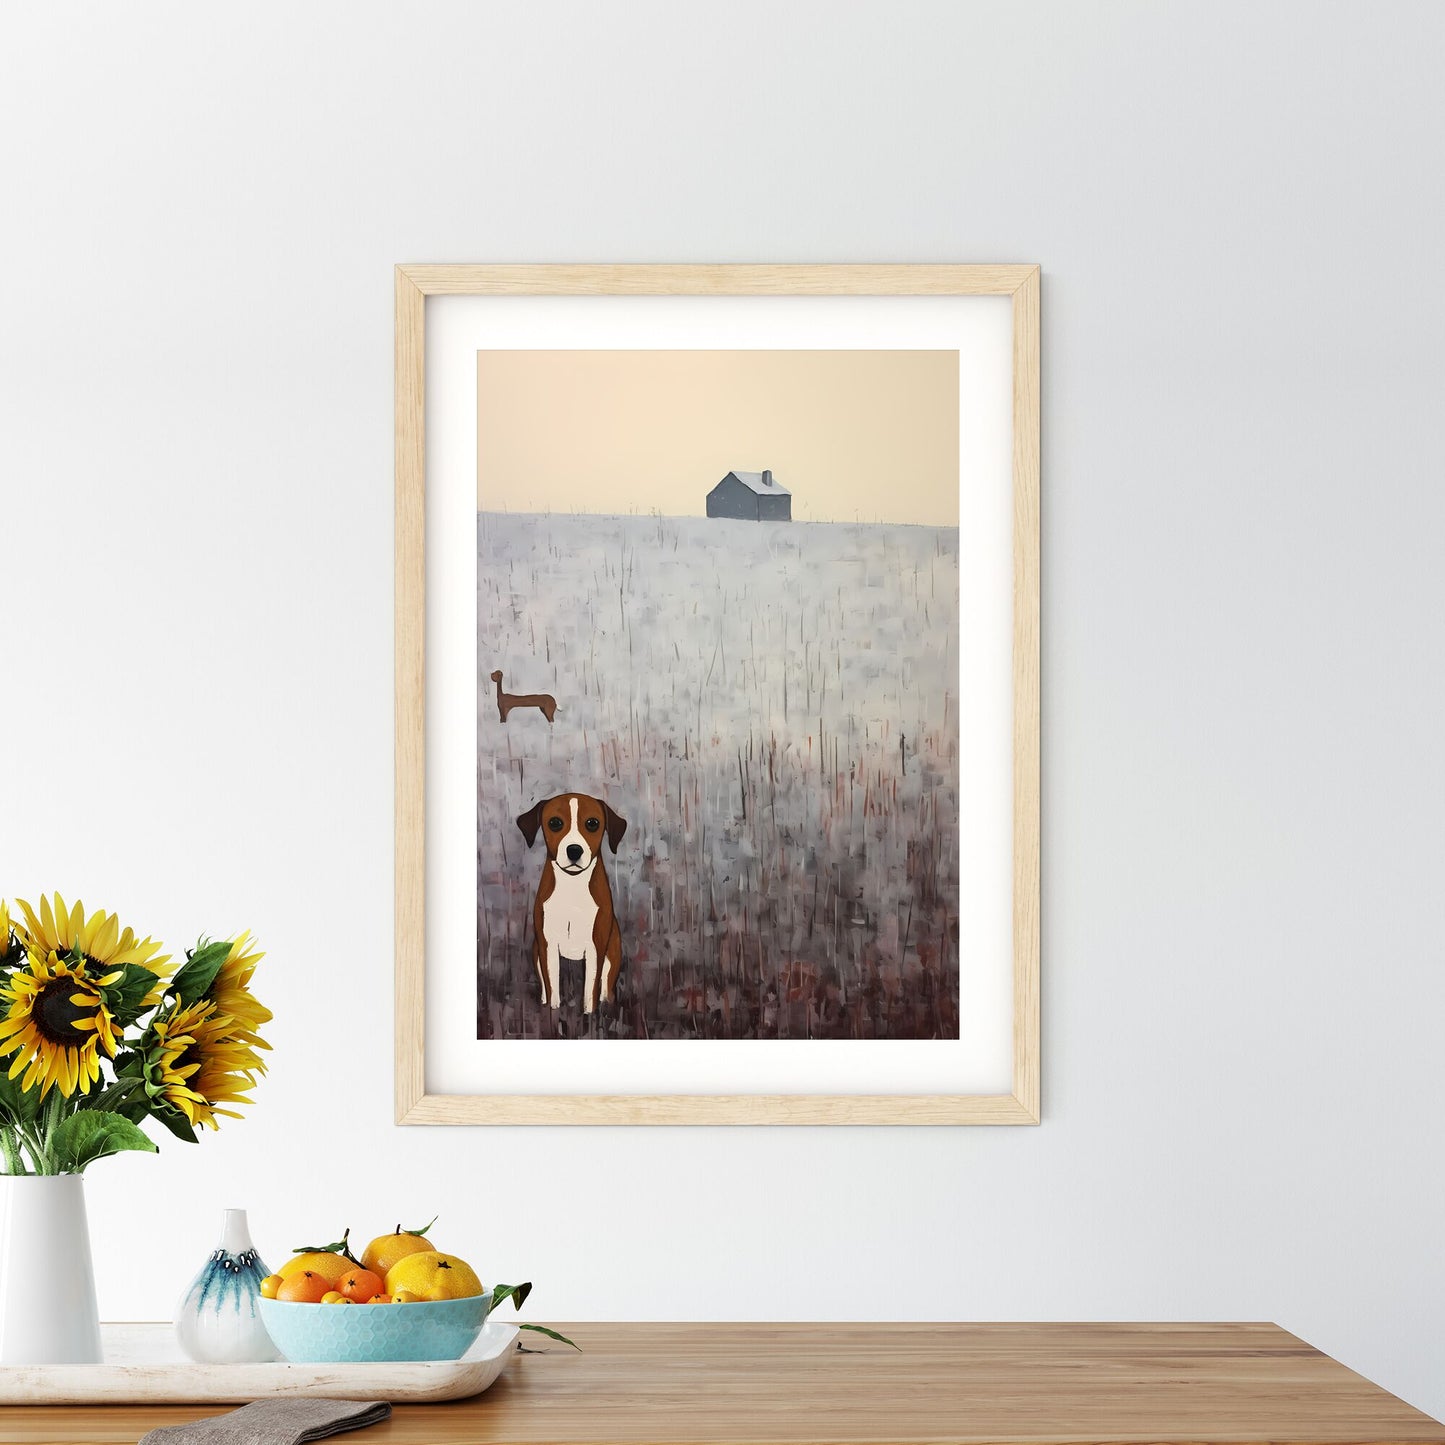 Painting Of A Dog In A Field With A House In The Background Art Print Default Title